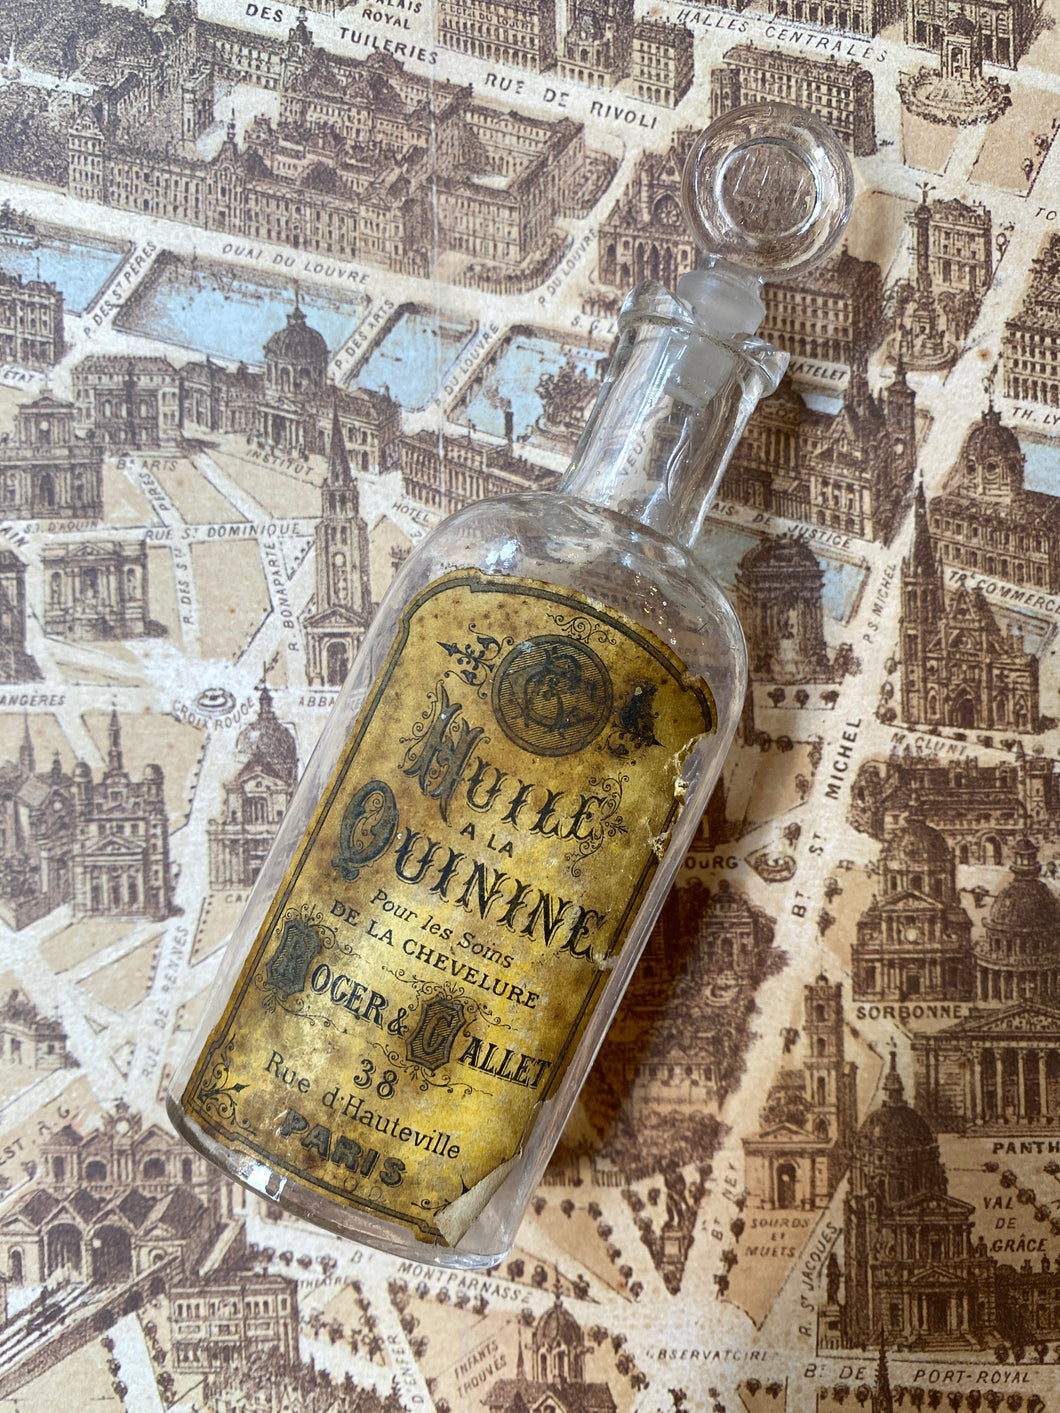 Antique small bottle / アンティーク小瓶 / Petite bouteille antique